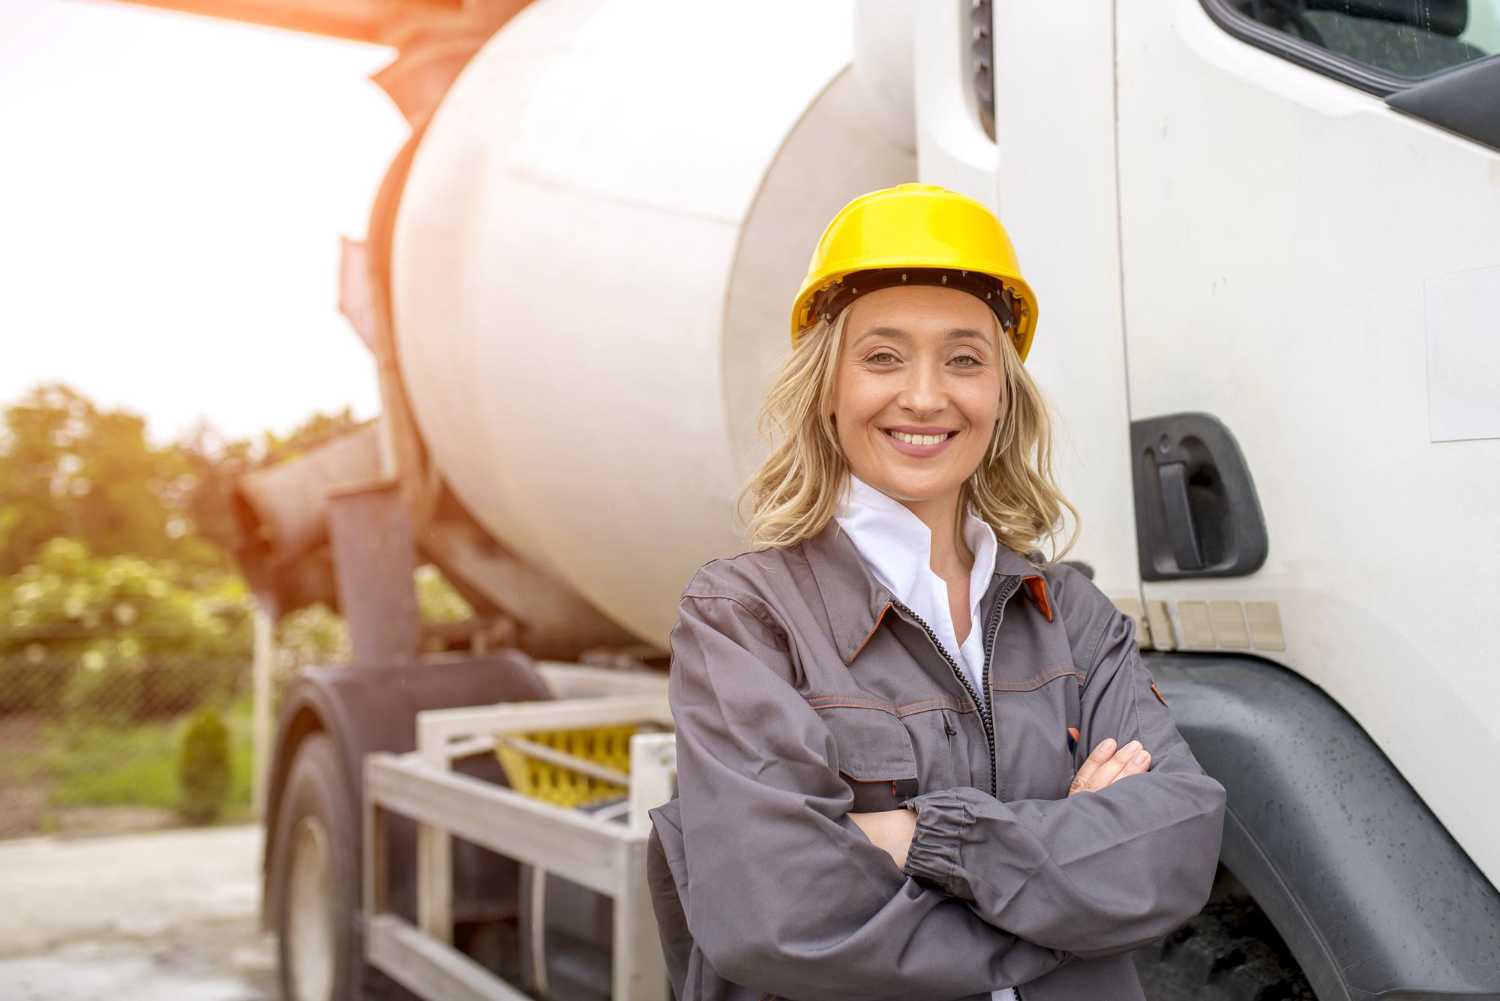 Future-Ready Solutions from Your Bulk Fuel Supplier